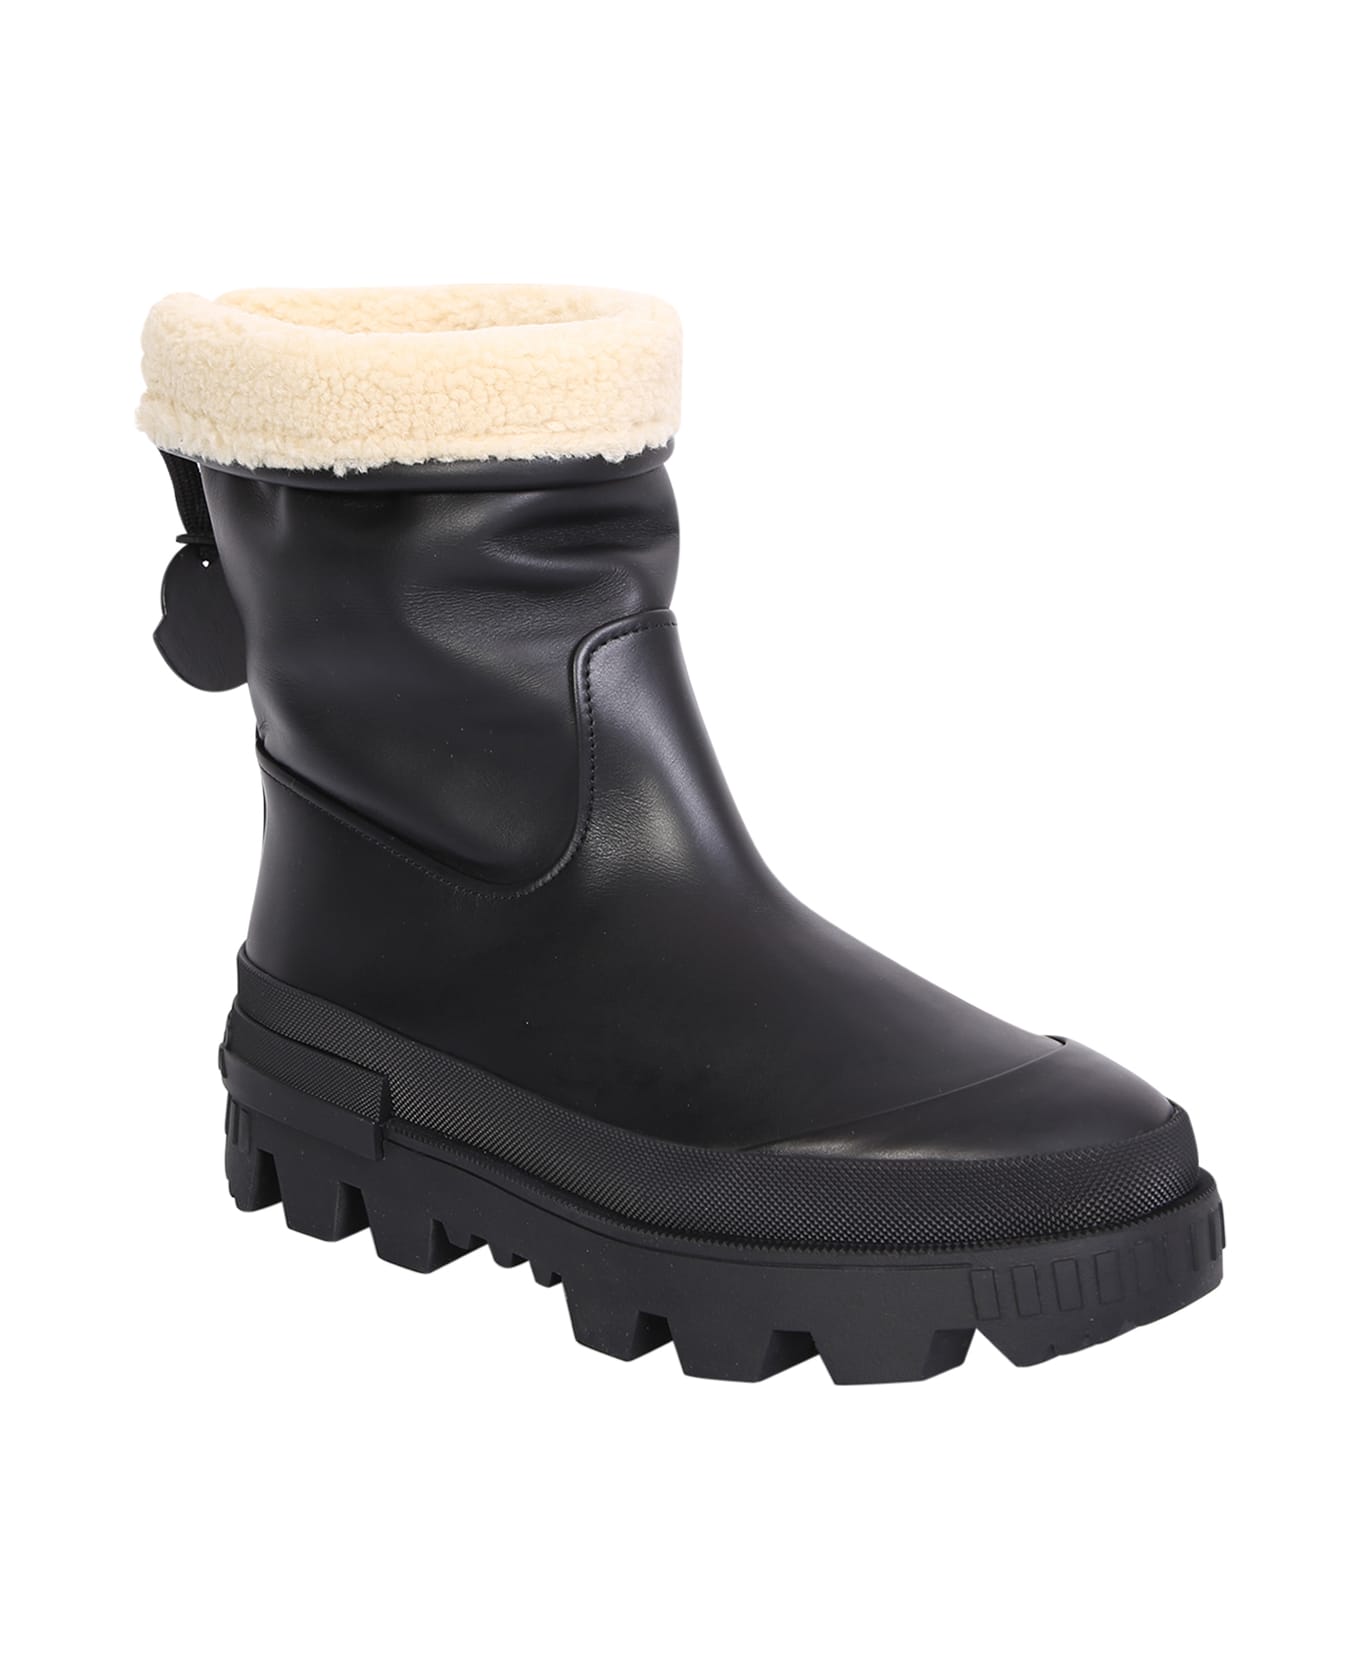 Moncler Moscova Ankle Boots - Black ブーツ